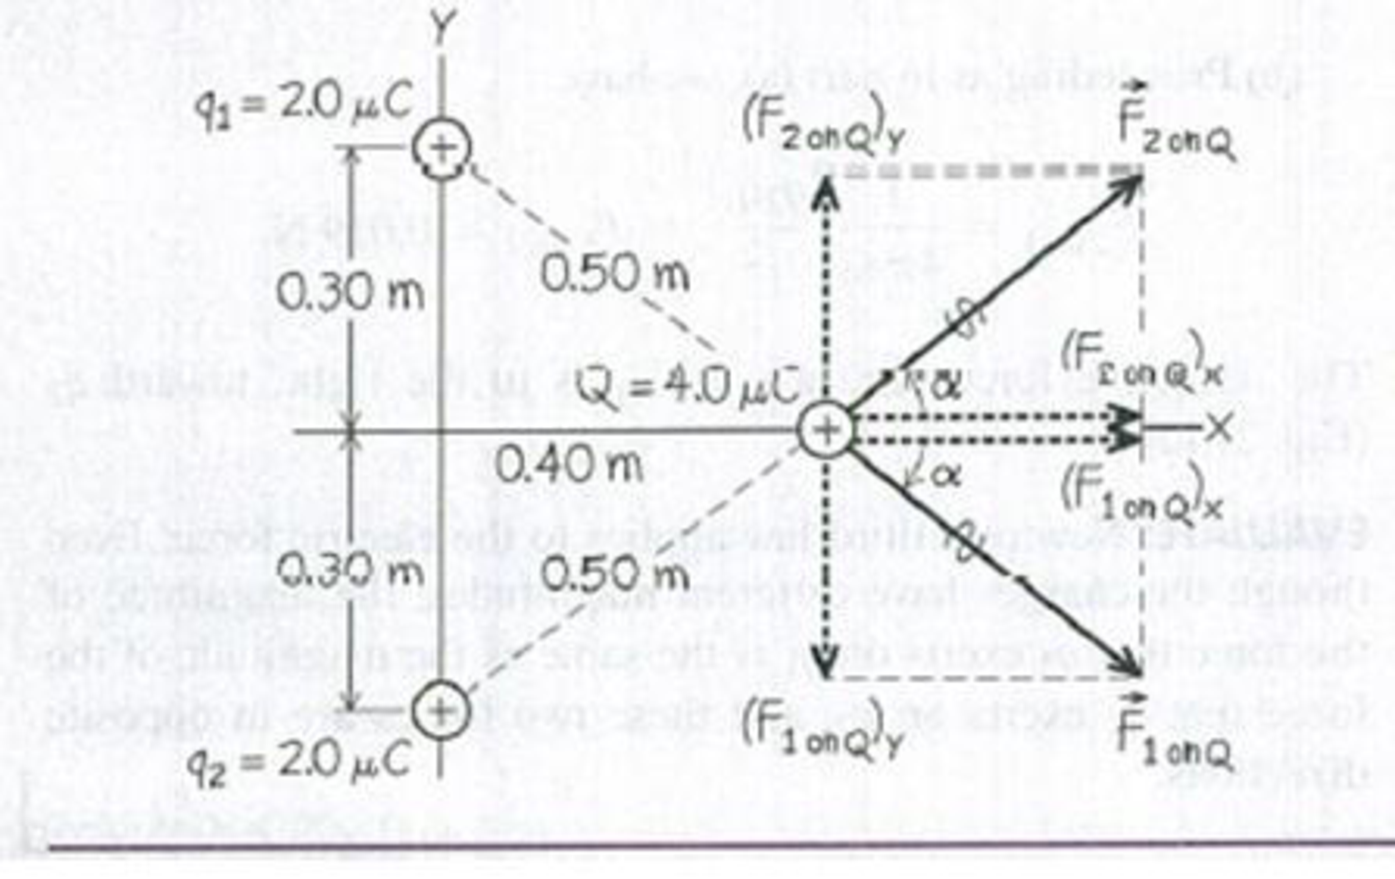 Chapter 21, Problem 21.14E, In Example 21.4, suppose the point charge on the y-axis at y = 0.30 m has negative charge 2.0C, and 